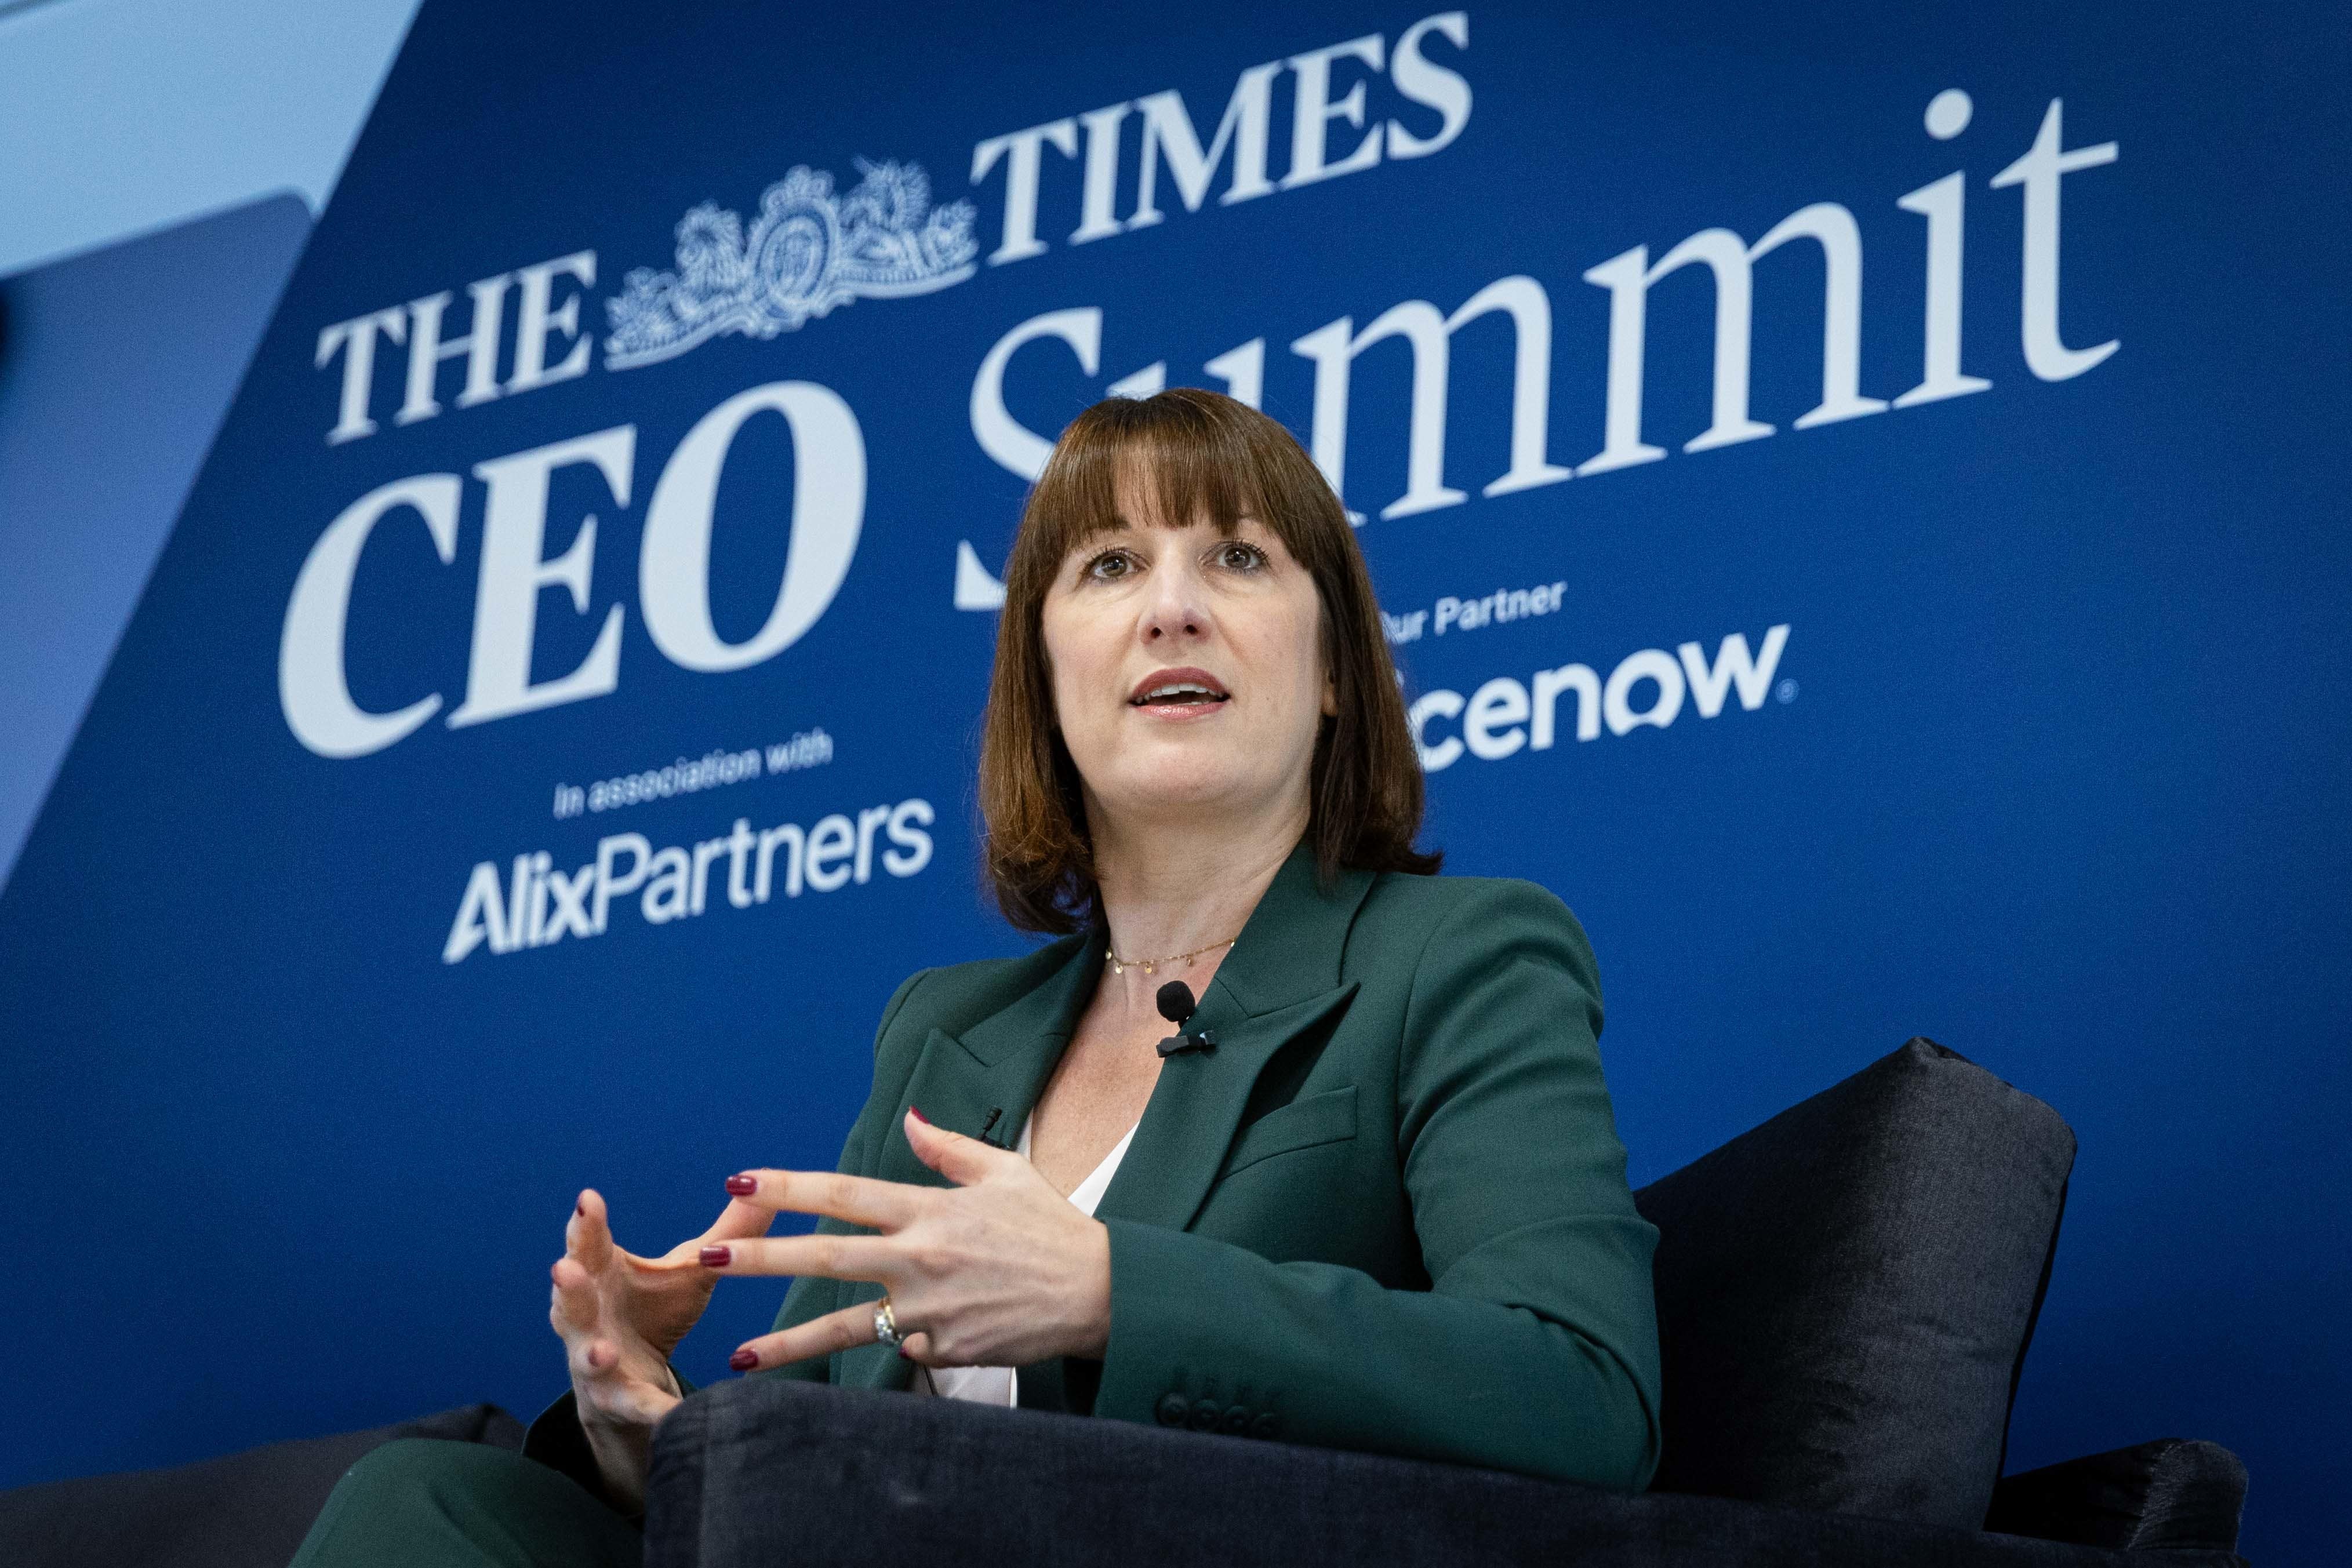 Shadow chancellor Rachel Reeves speaking during the Times CEO Summit in London